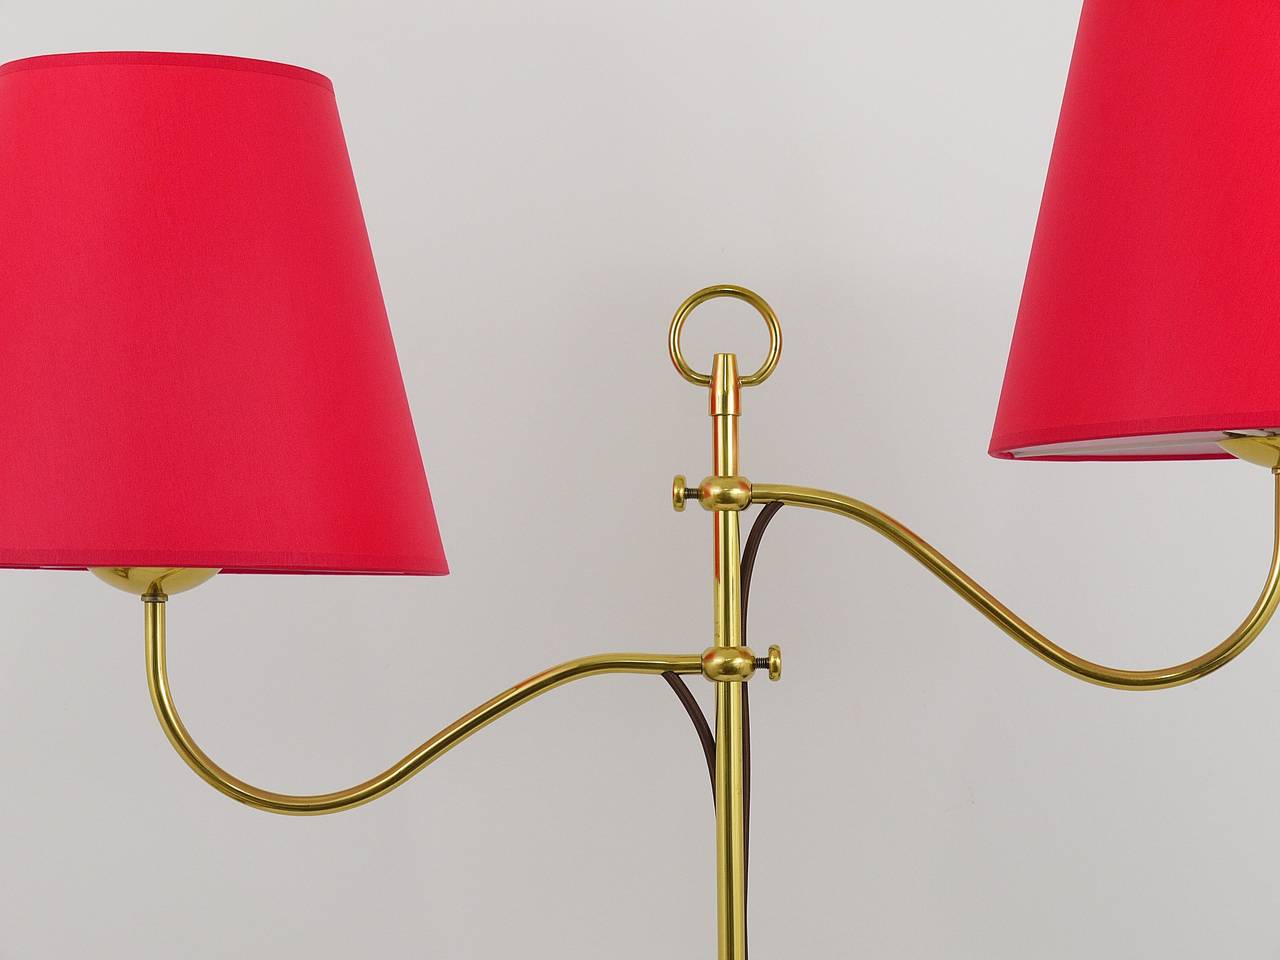 A very beautiful and unusual Viennese brass floor lamp, designed by Josef Frank in the early 1950s. A charming lamp with two rotatable and height-adjustable arms and lovely details. In excellent condition. Has been carefully restored and rewired and